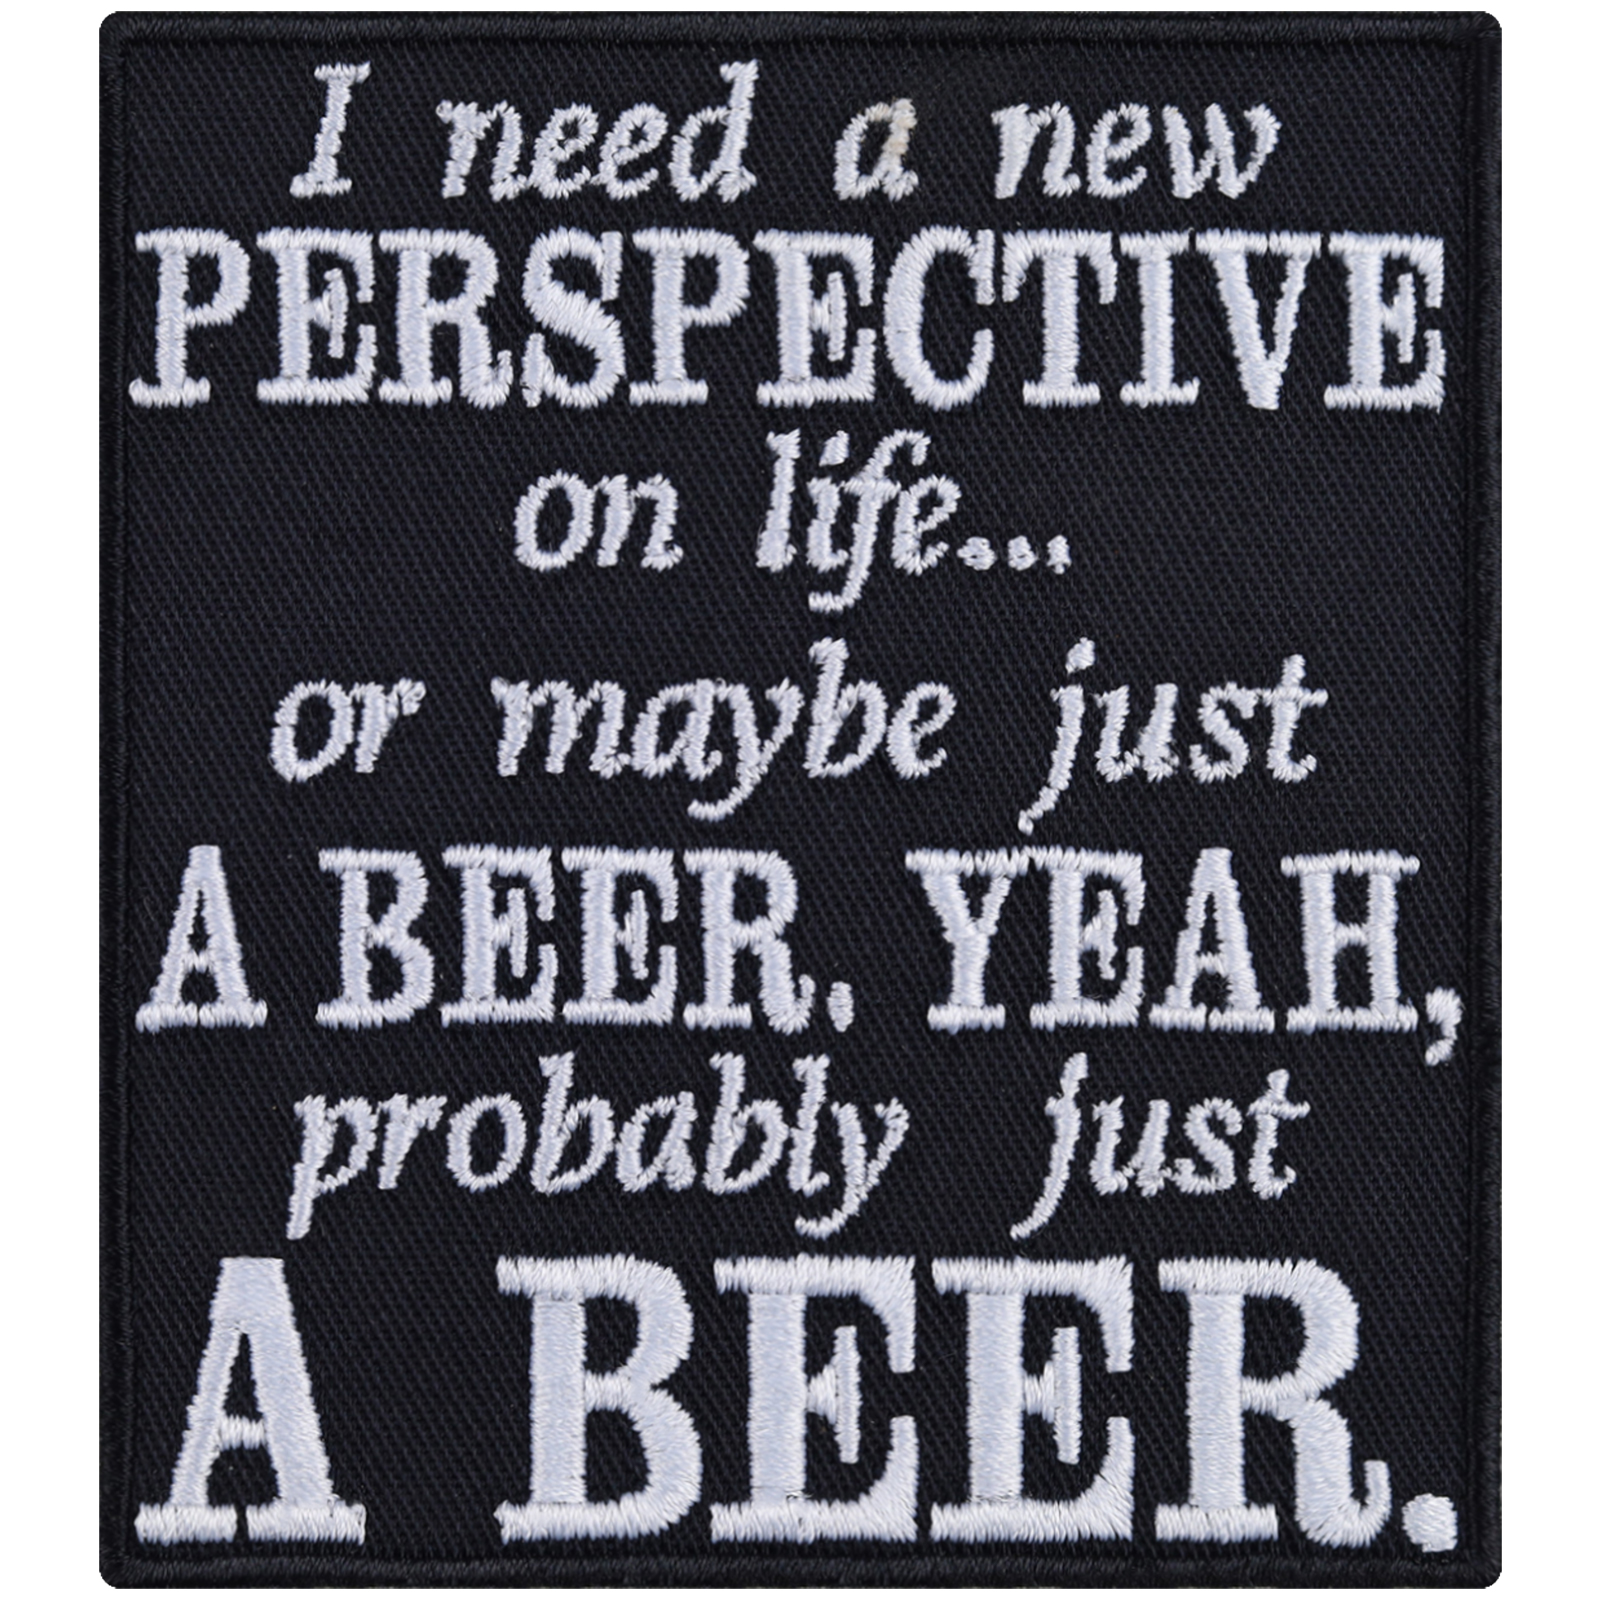 I need a new perspective on life... Or maby just a beer, yeah probaly just a beer. - Patch